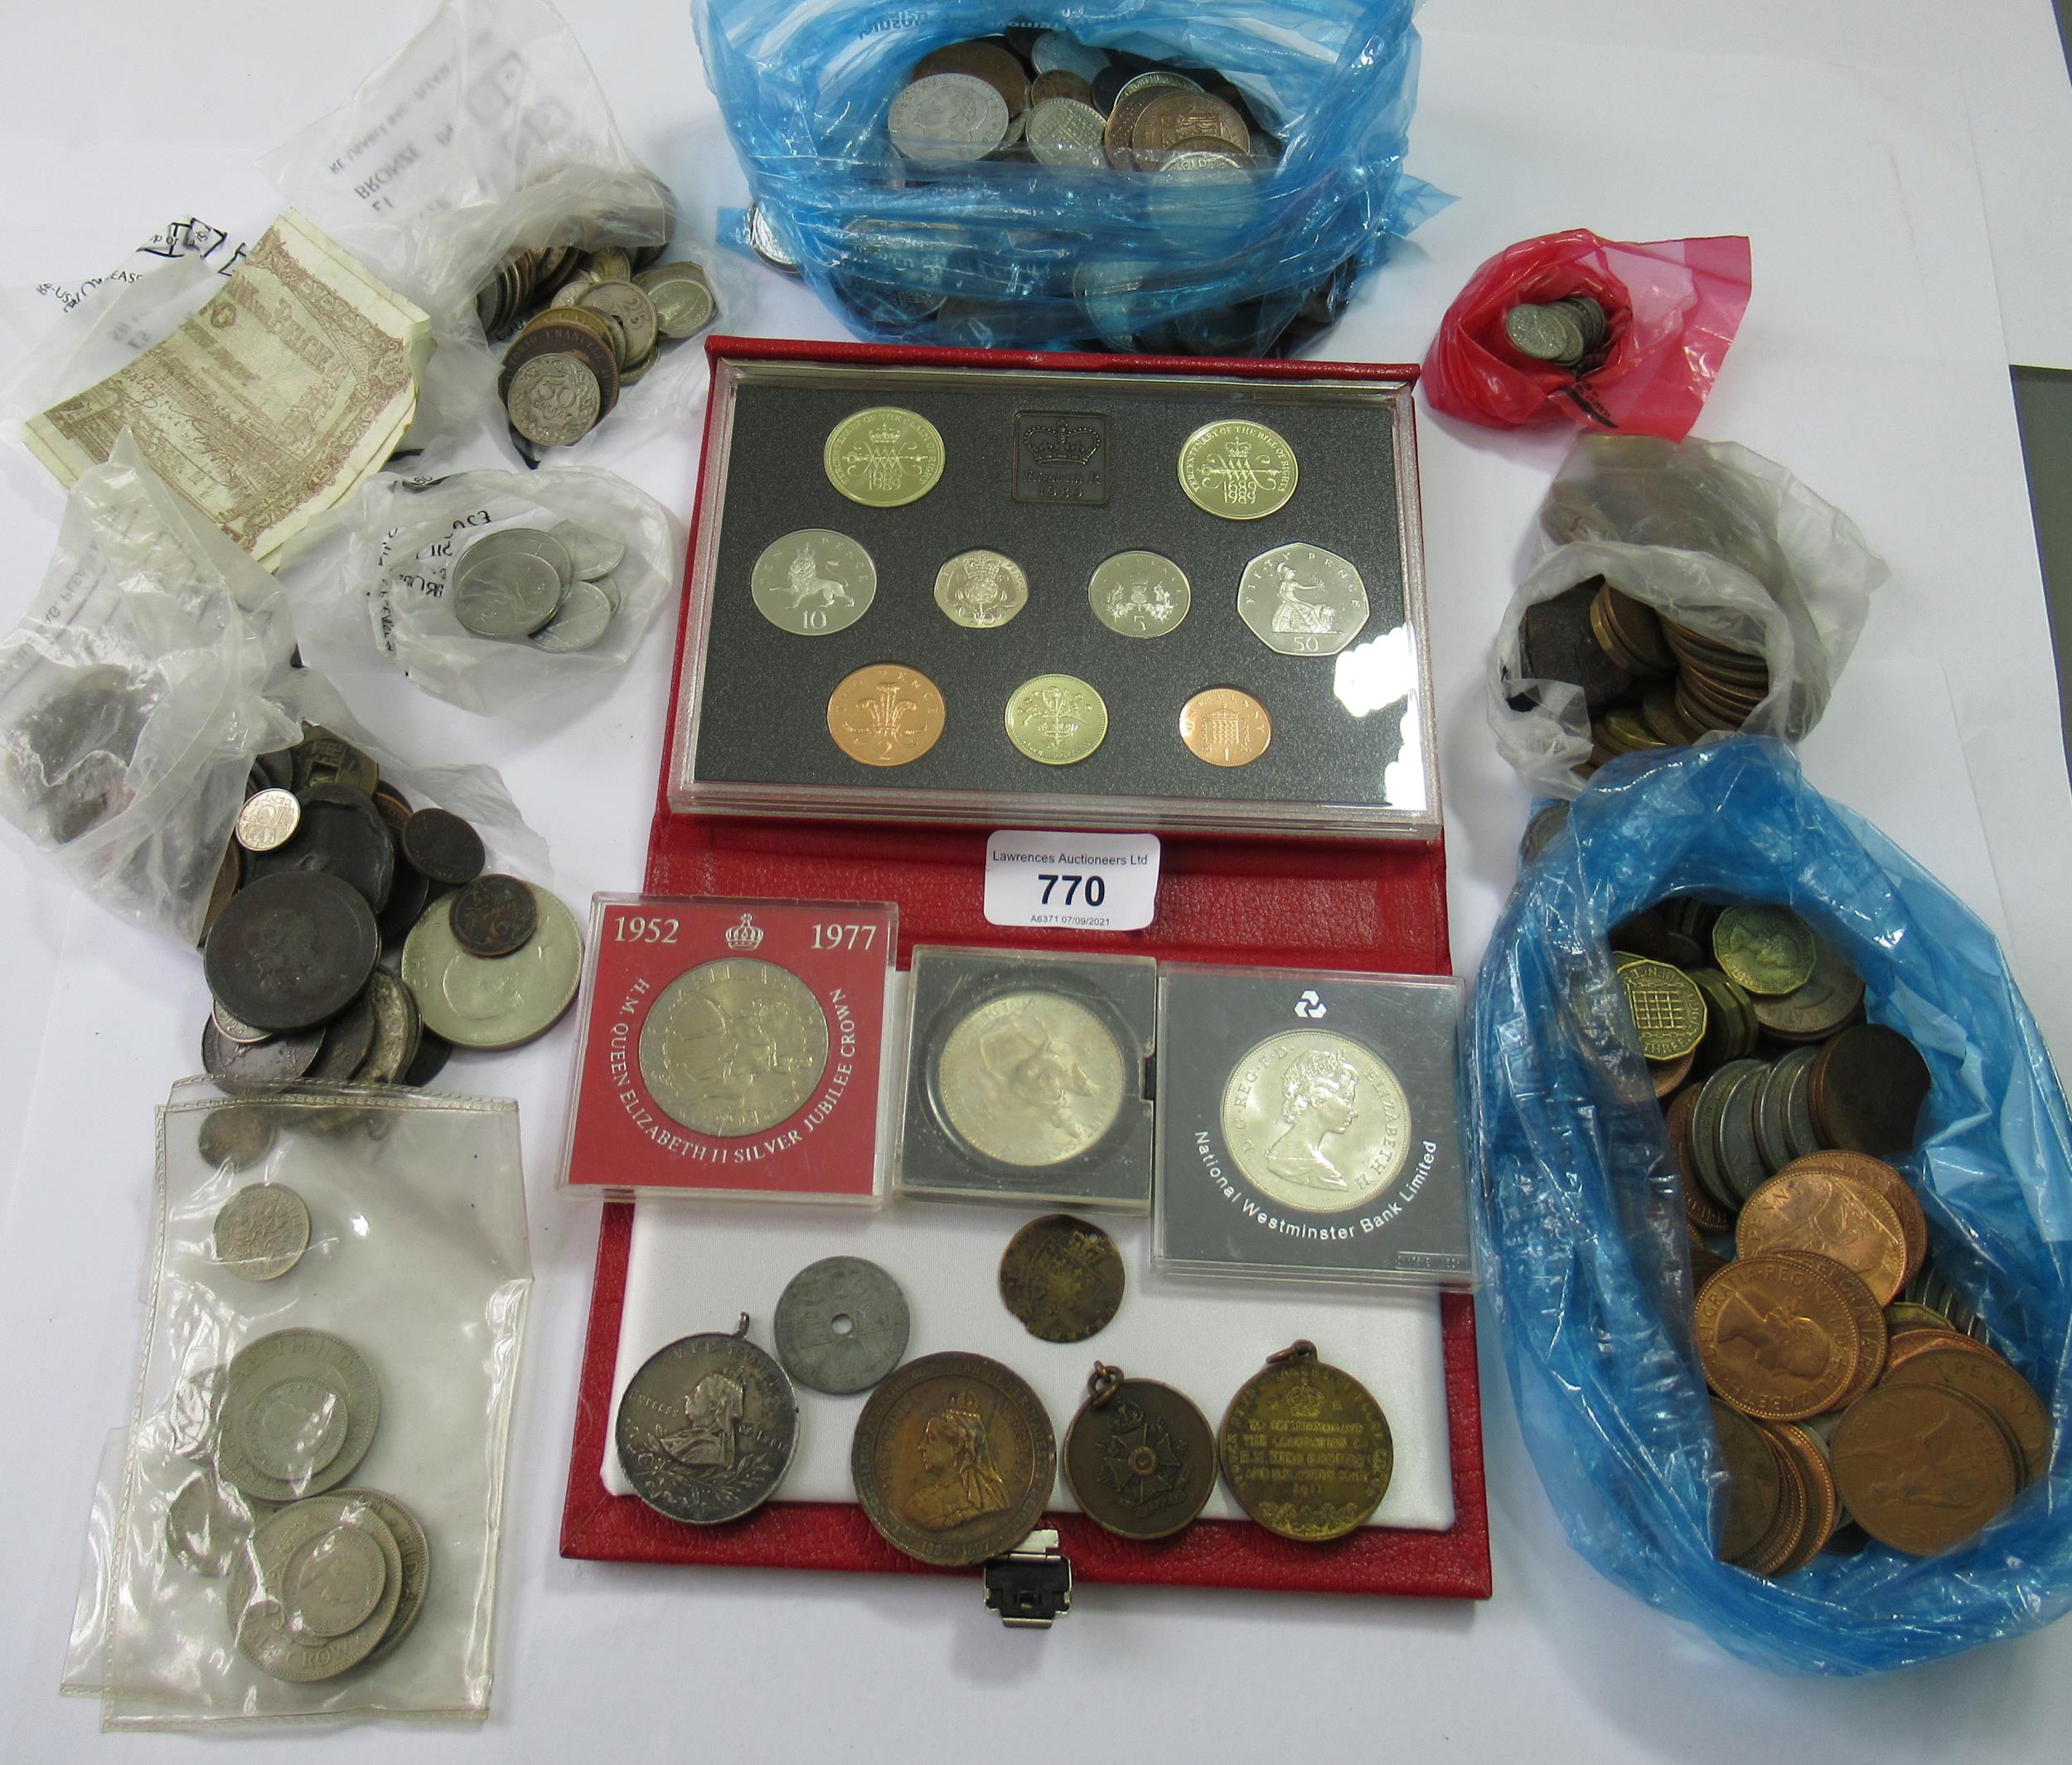 1989 Proof coin set together with a large quantity of other miscellaneous coins